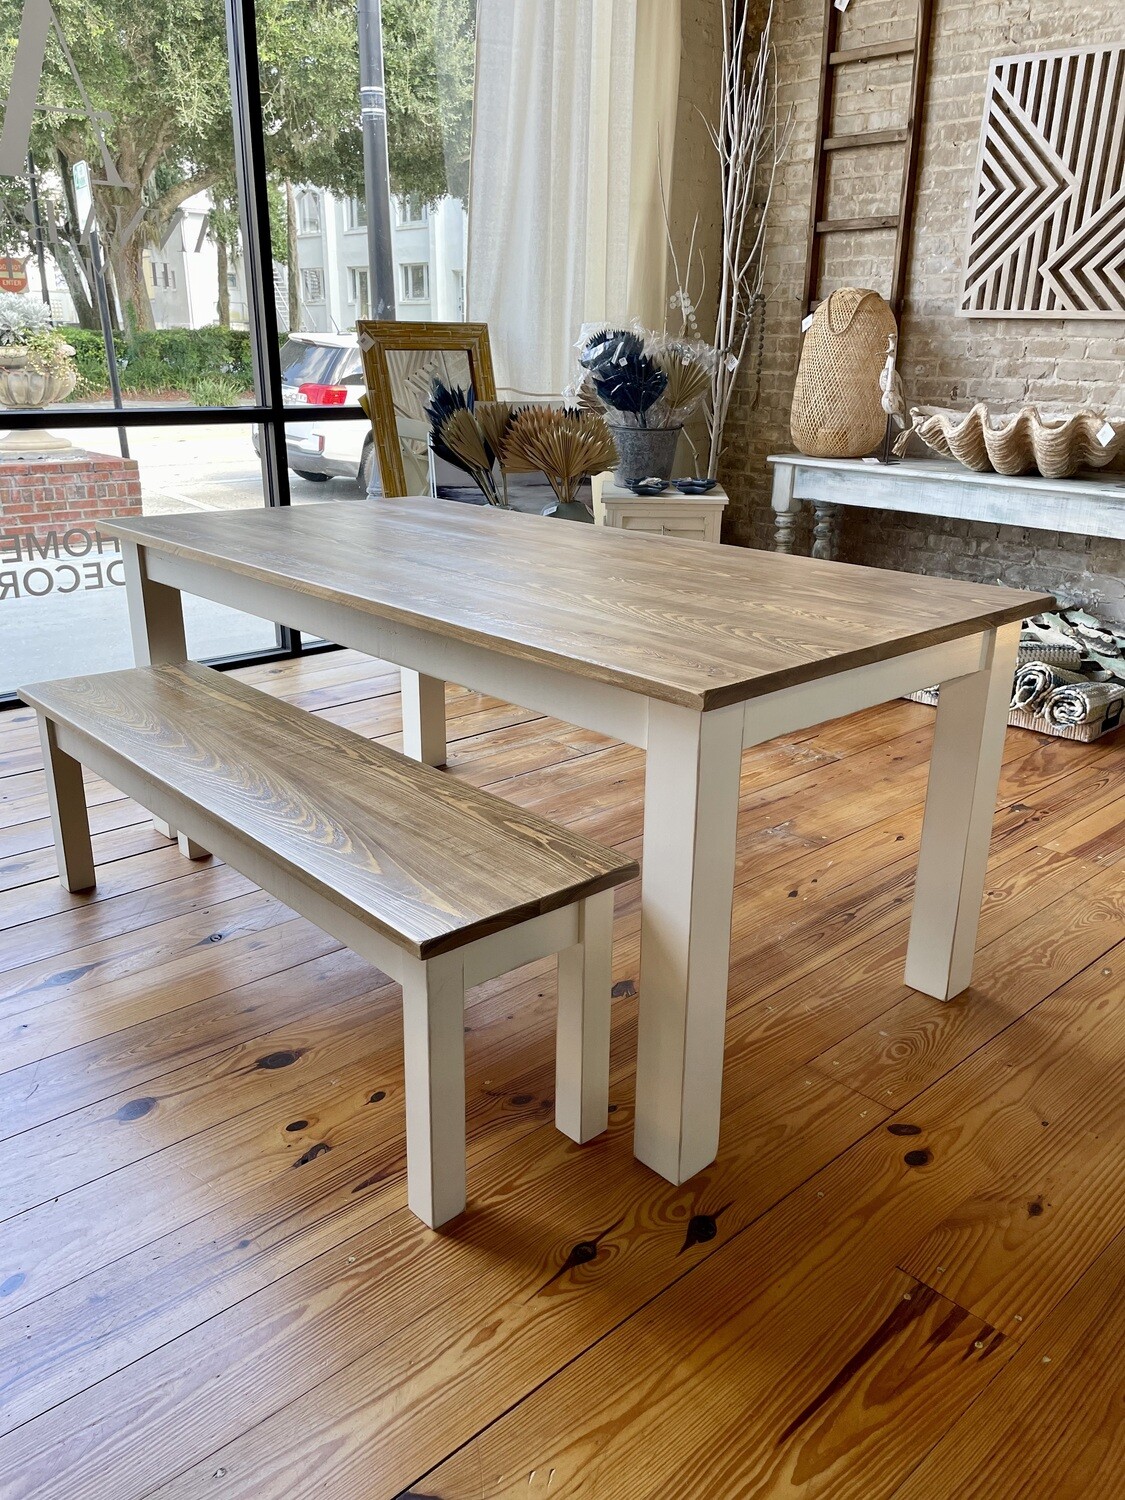 AB 6' Table w/ Bench